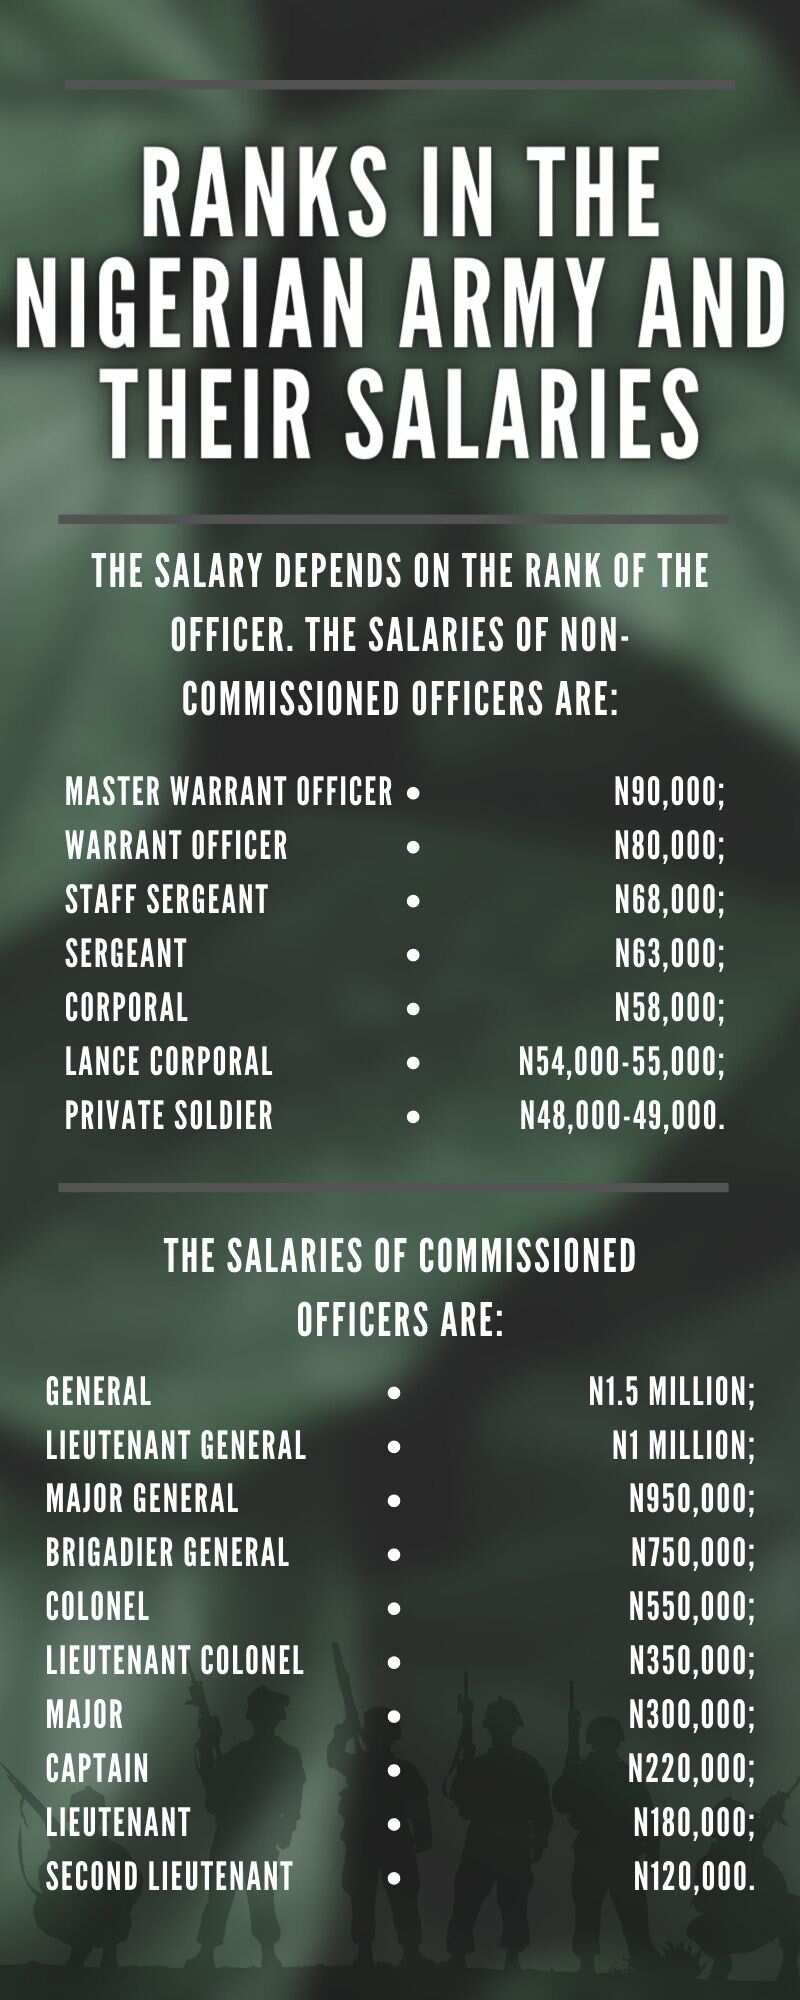 Army Warrant Officer Pay Chart